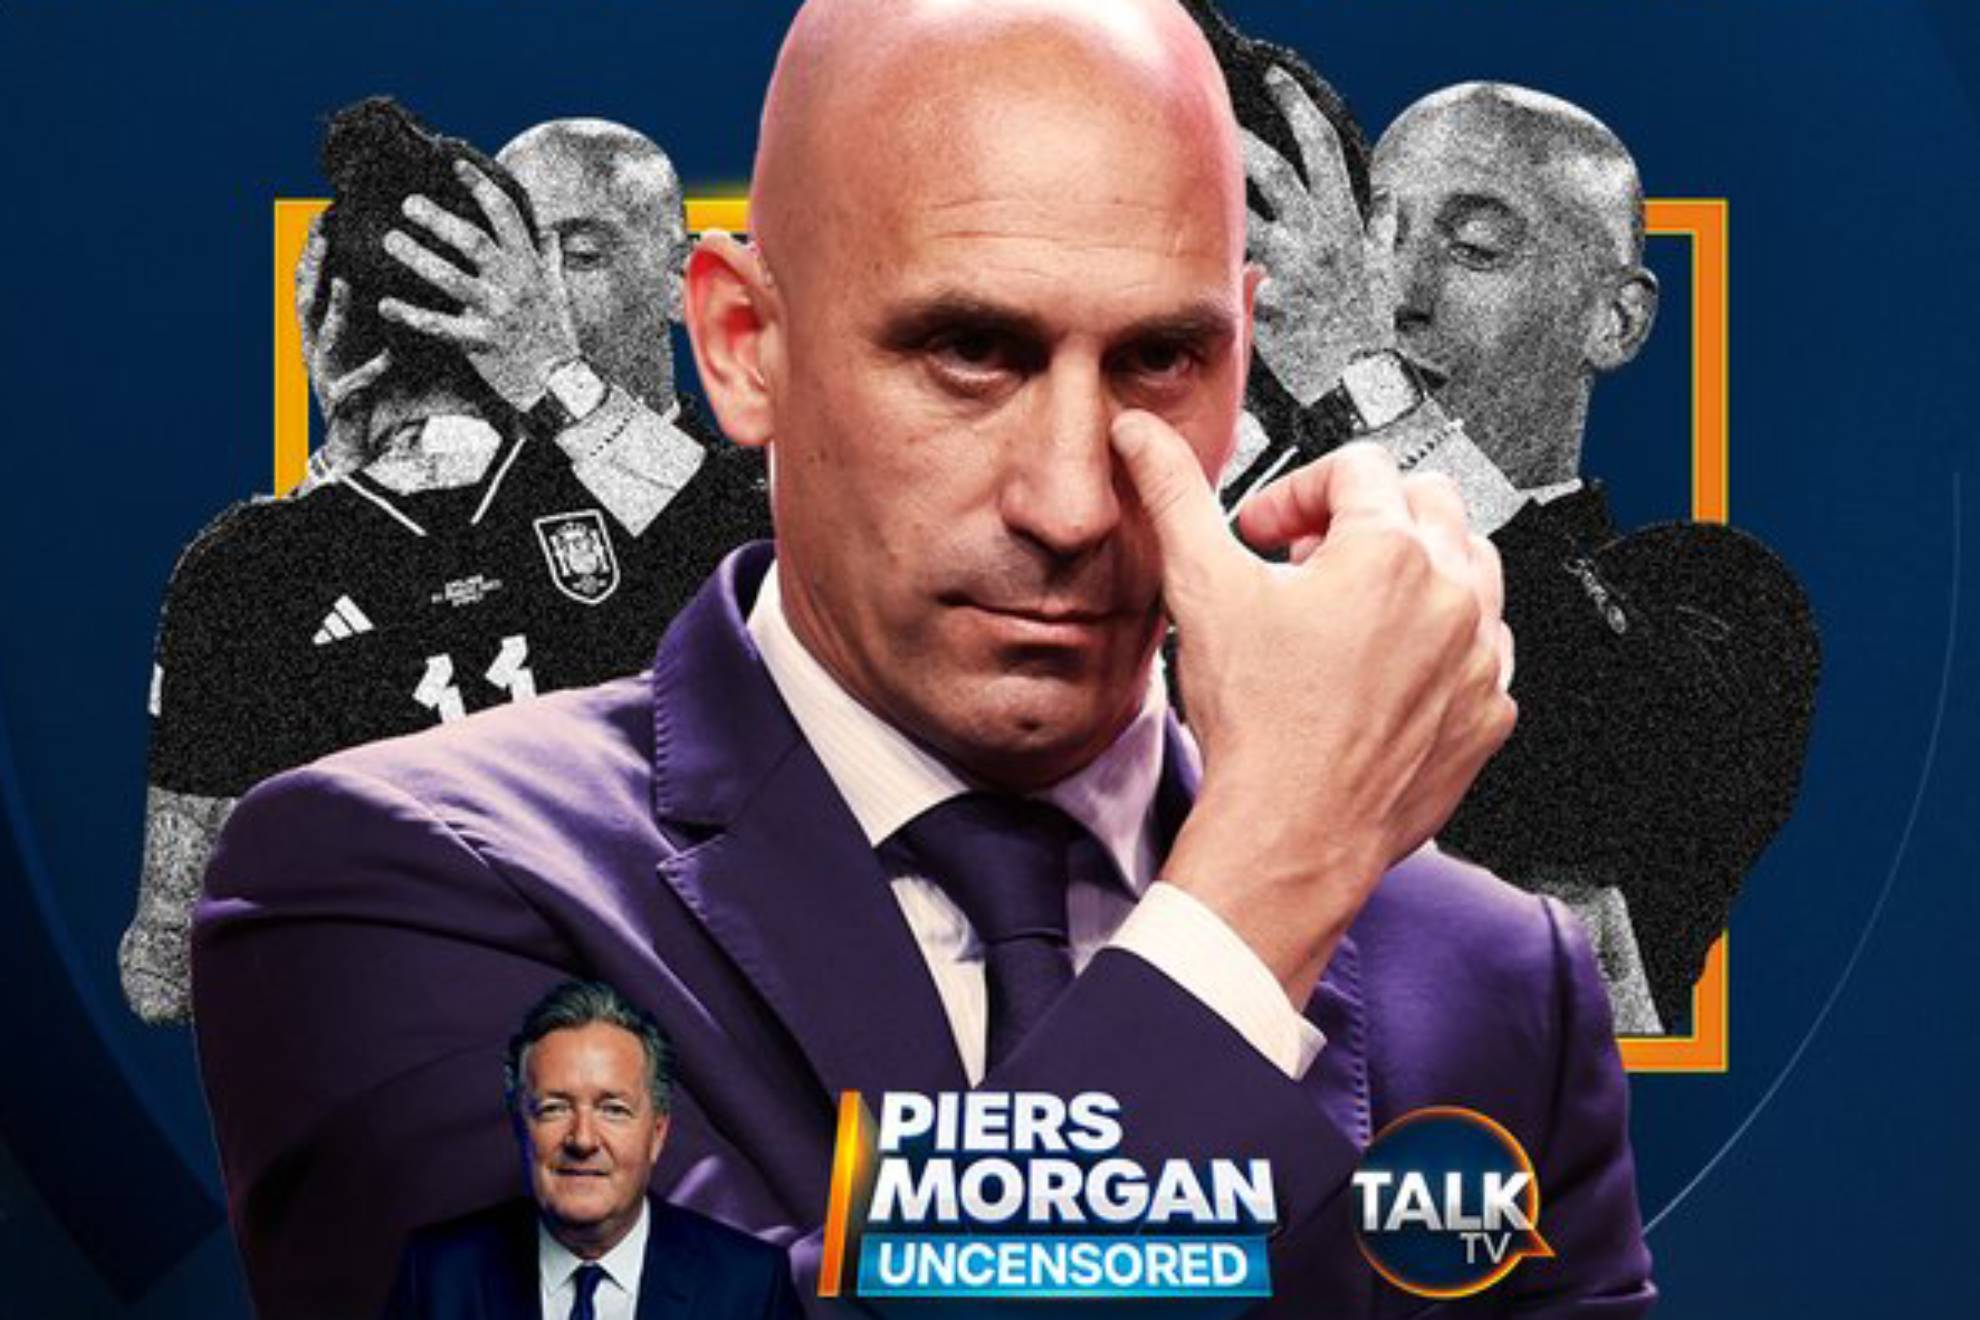 Who is Piers Morgan, the controversial journalist who Luis Rubiales announced his resignation to?